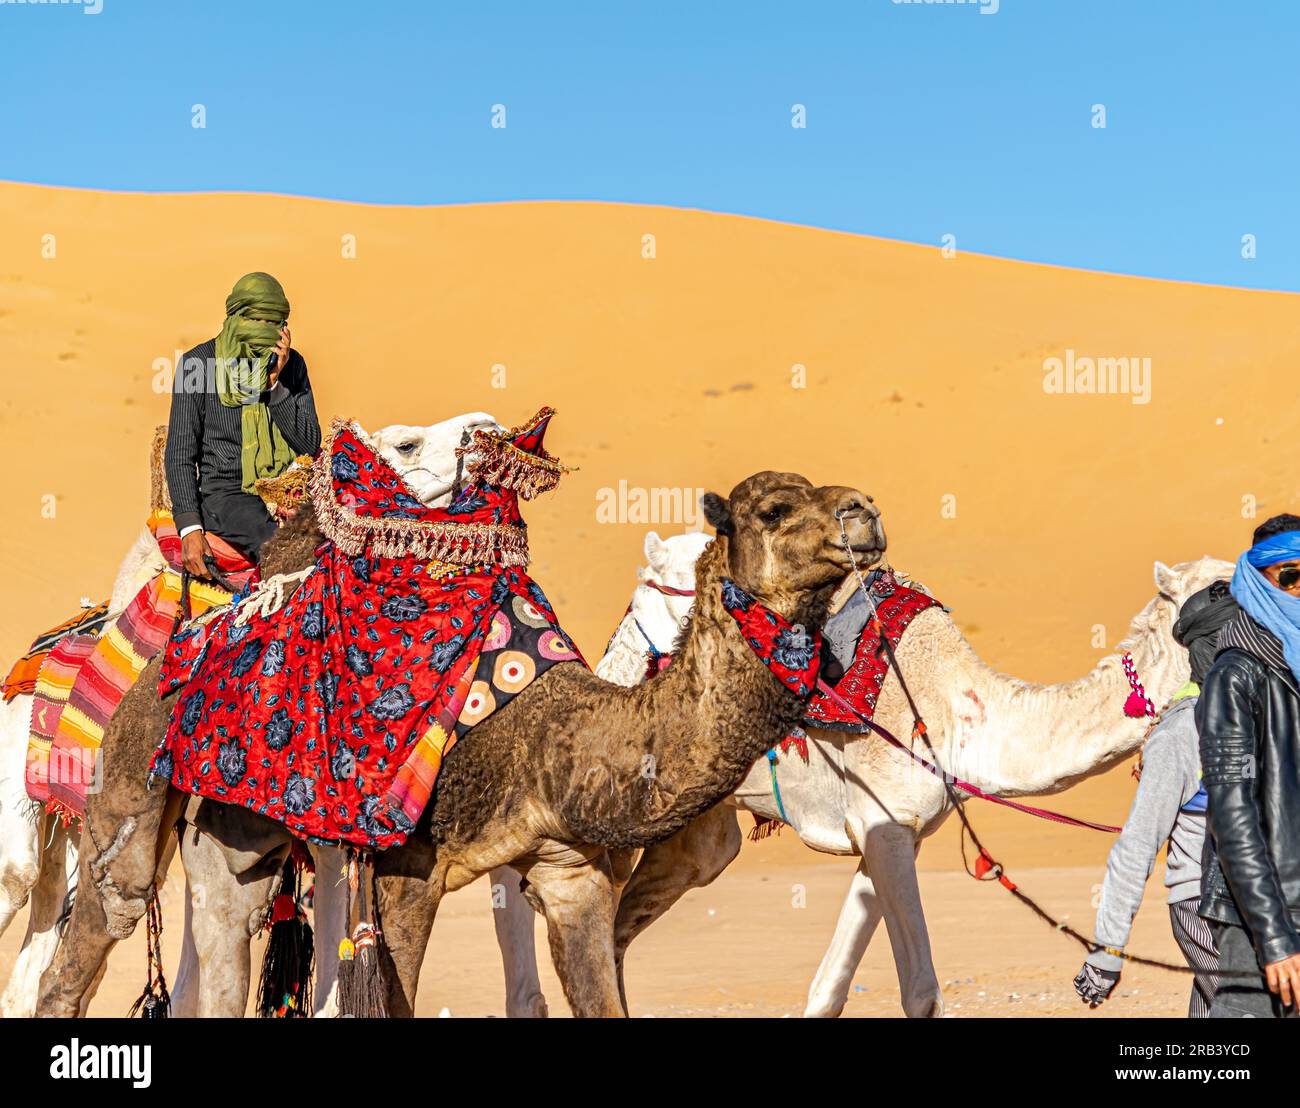 Unrecognizable Tuareg persons obscured faces with head scarfs and sunglasses riding dromedary camels decorated with red colored tissue saddle walking. Stock Photo